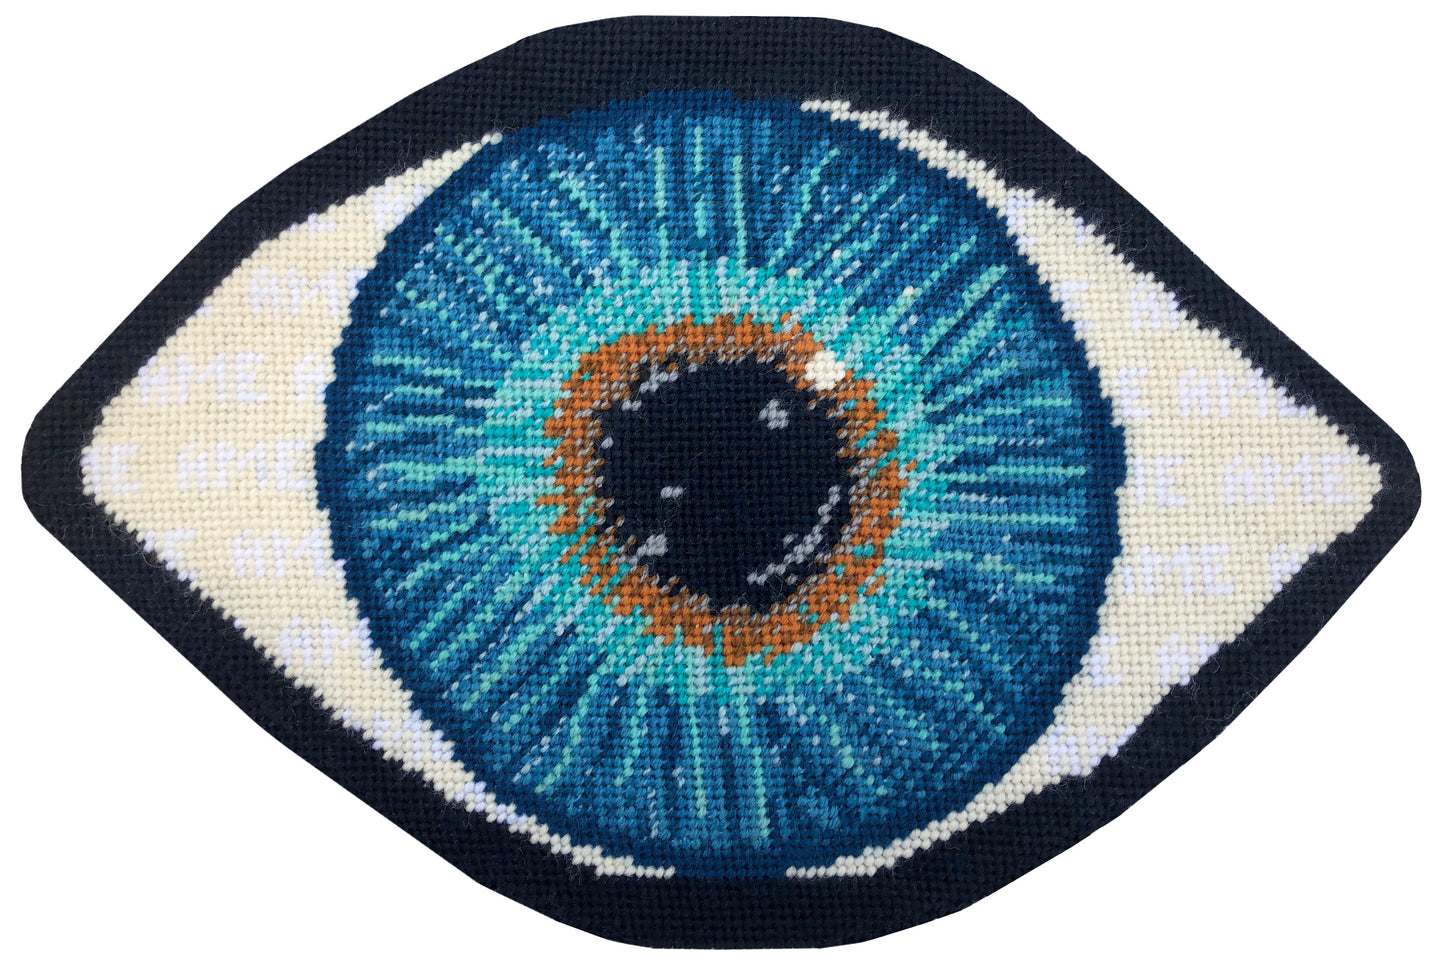 blue eye print has gold in center, turning to turquoise, then deep blues - very detailed